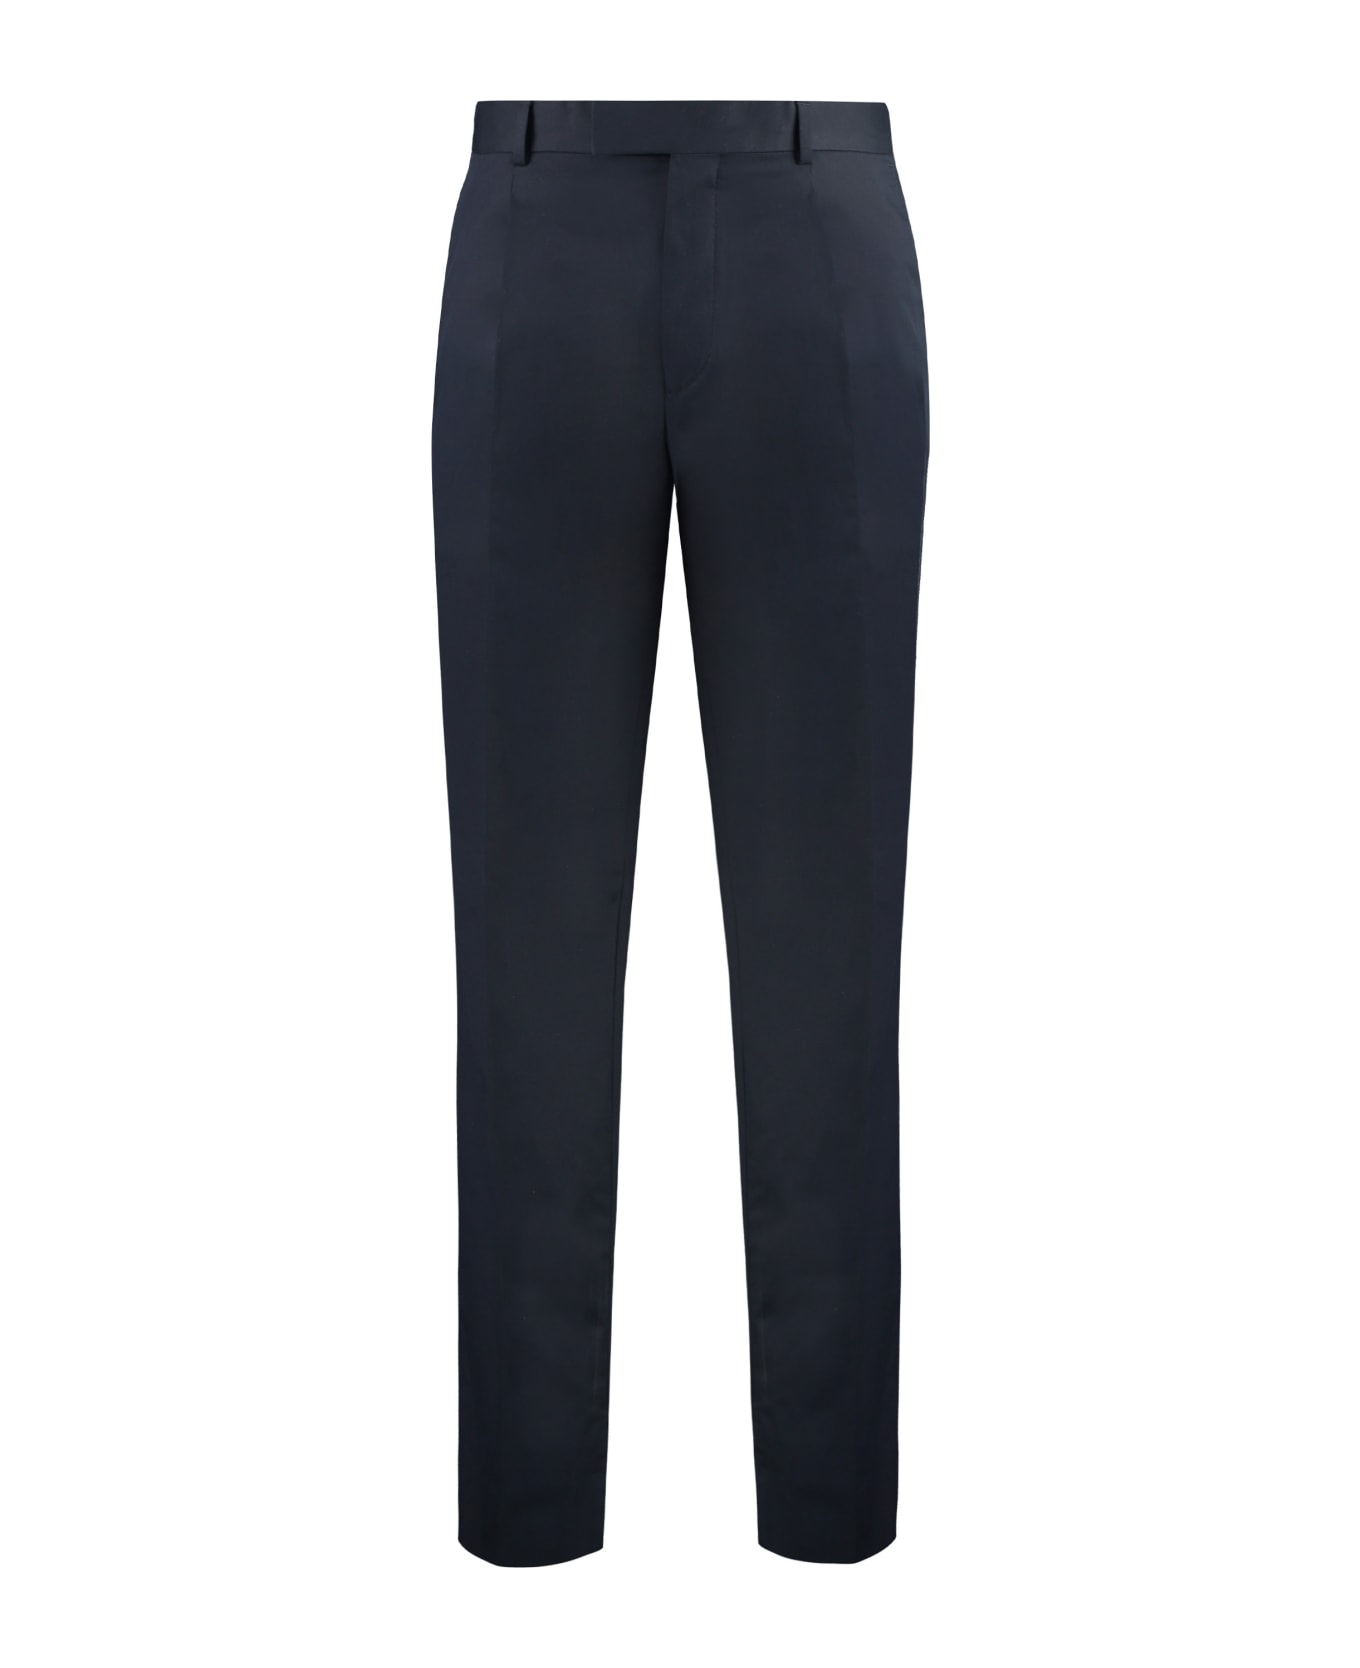 Zegna Stretch Cotton Chino Trousers - blue